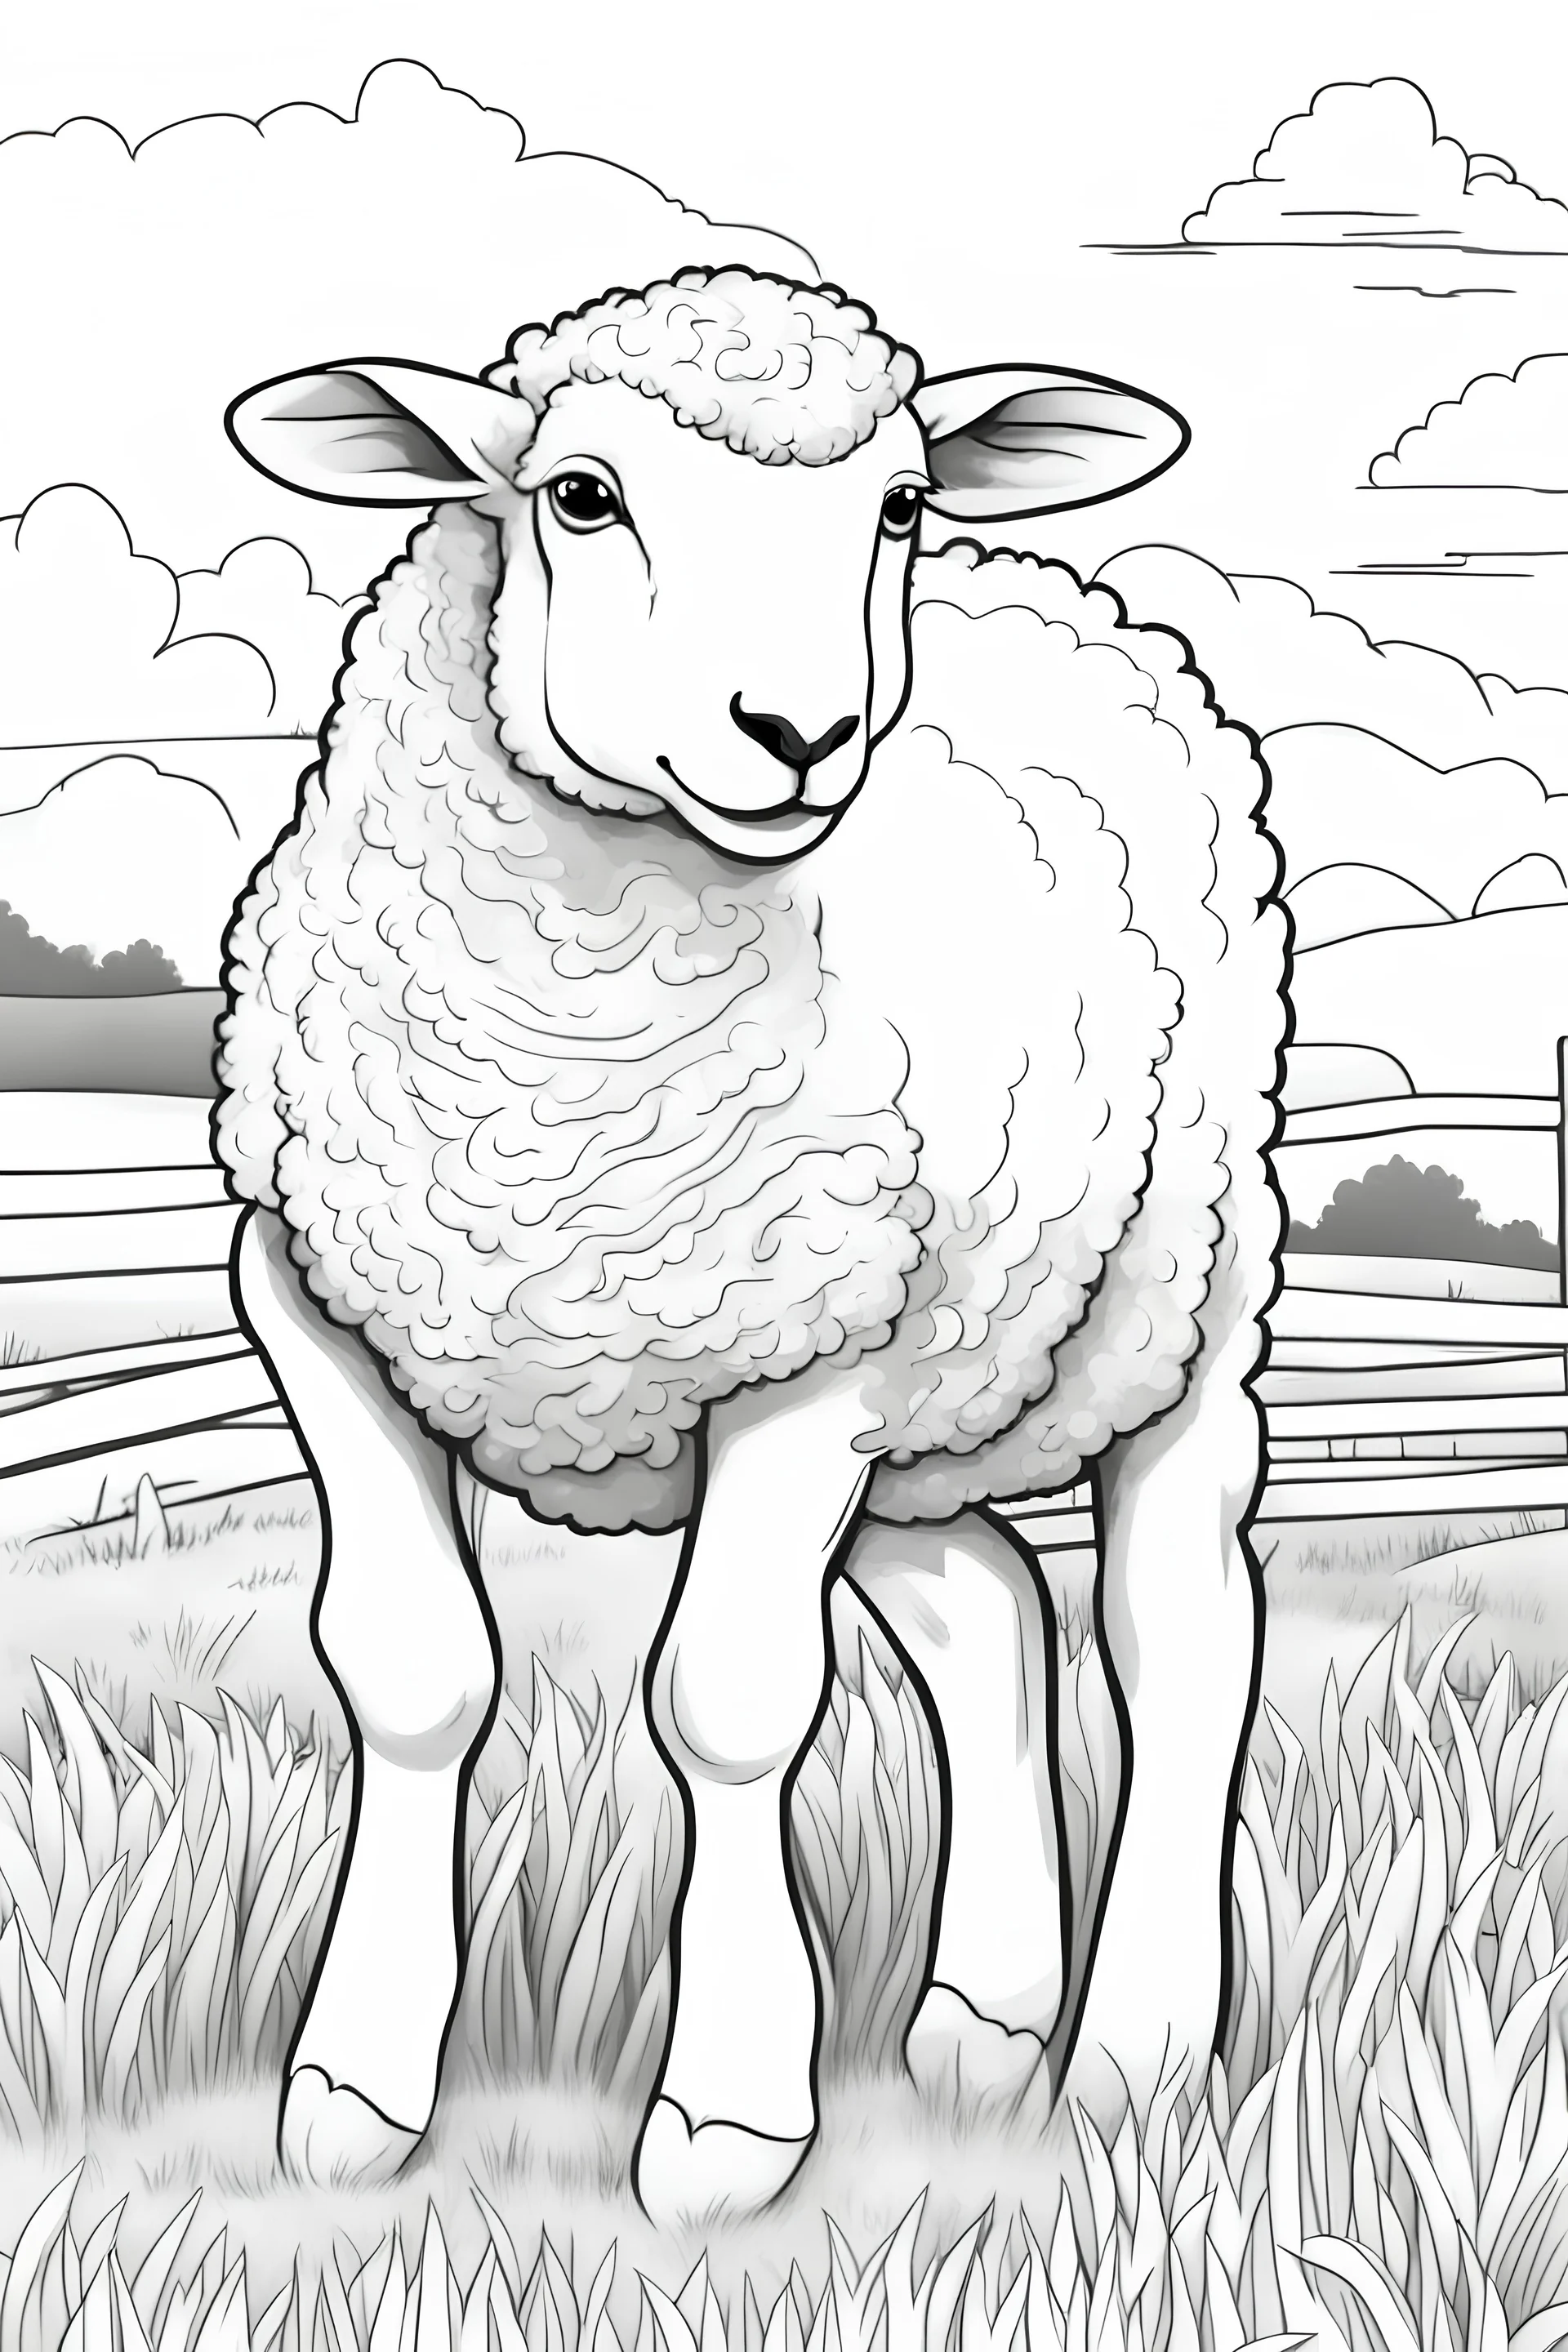 black and white coloring page for kids of a sheep on a farm; line art; no color, no greyscale, no deformity